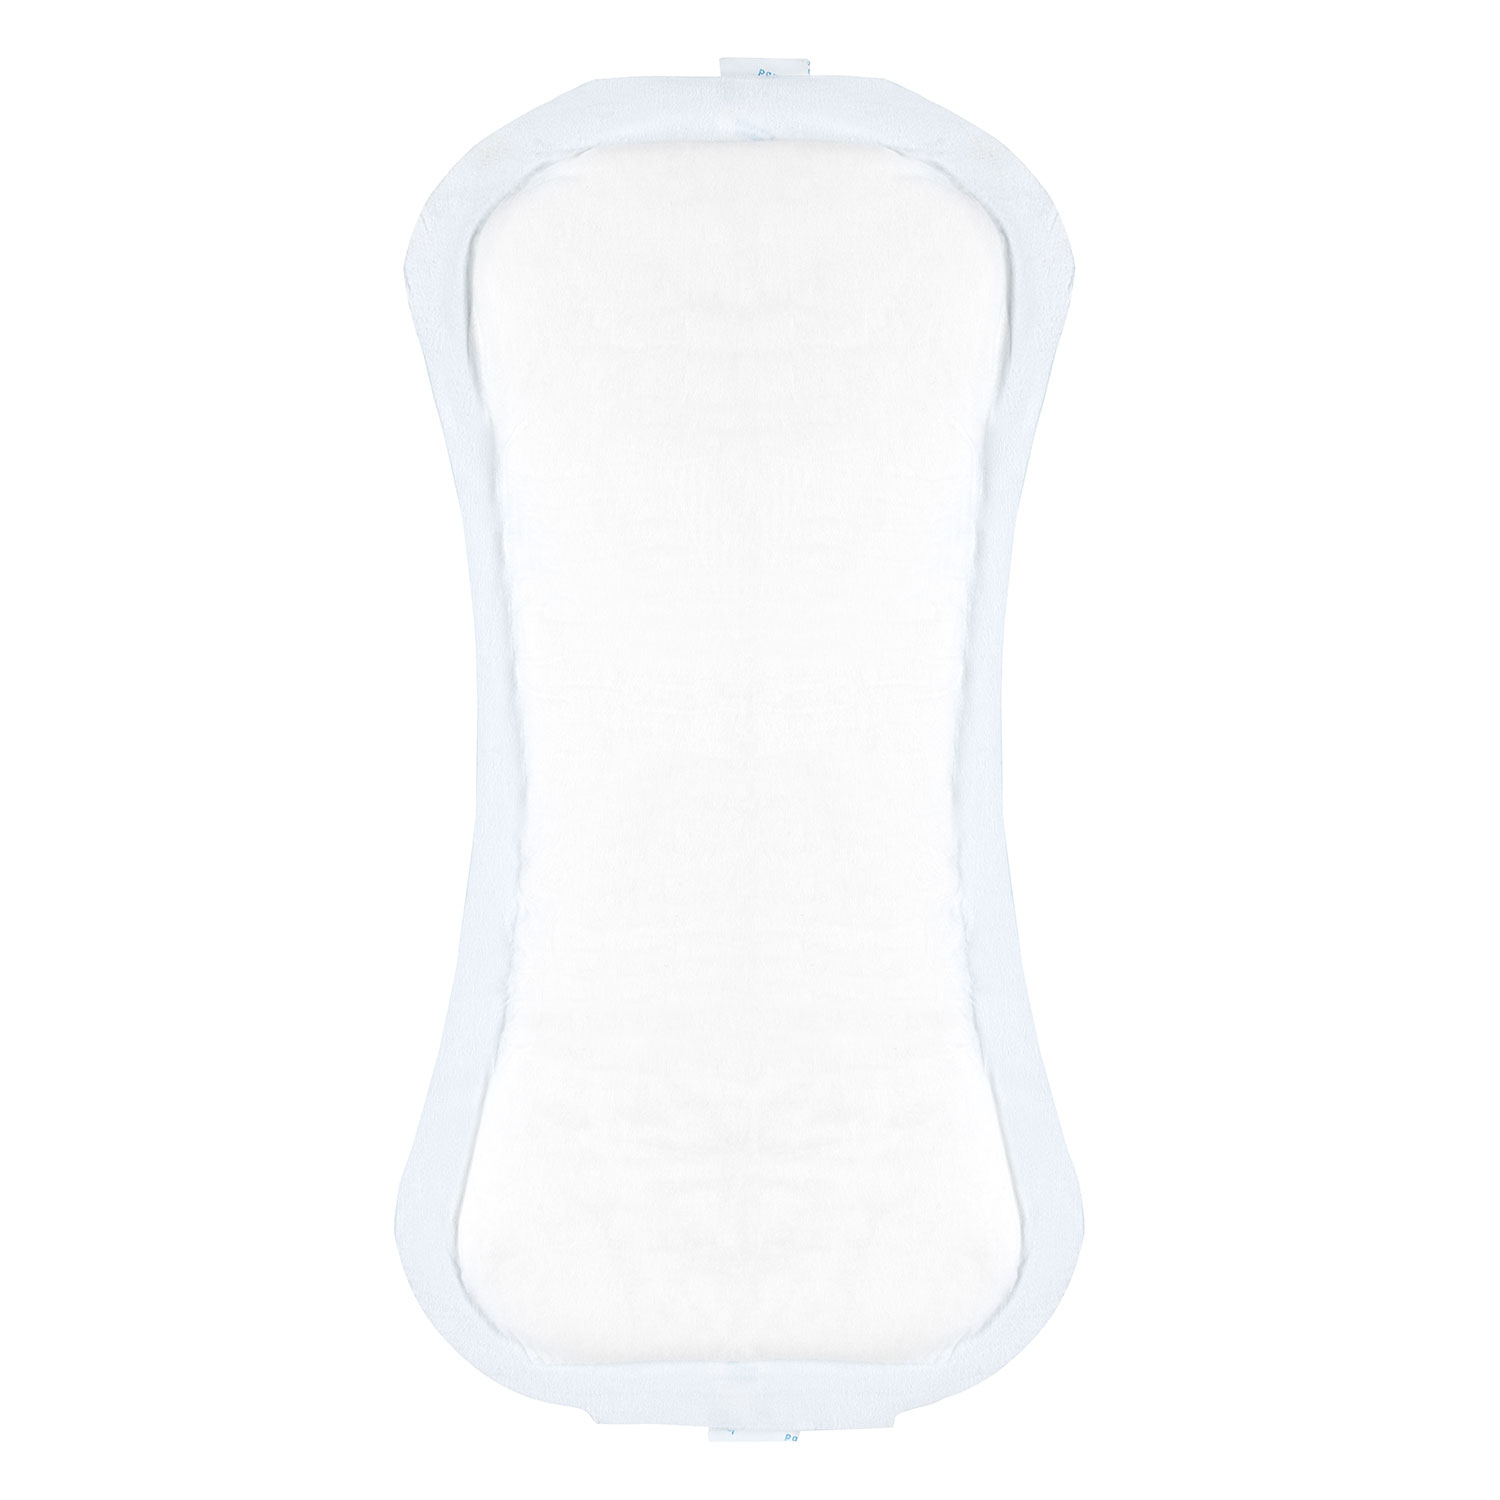 Canpol babies Discreet Postpartum Pads With Wings Night